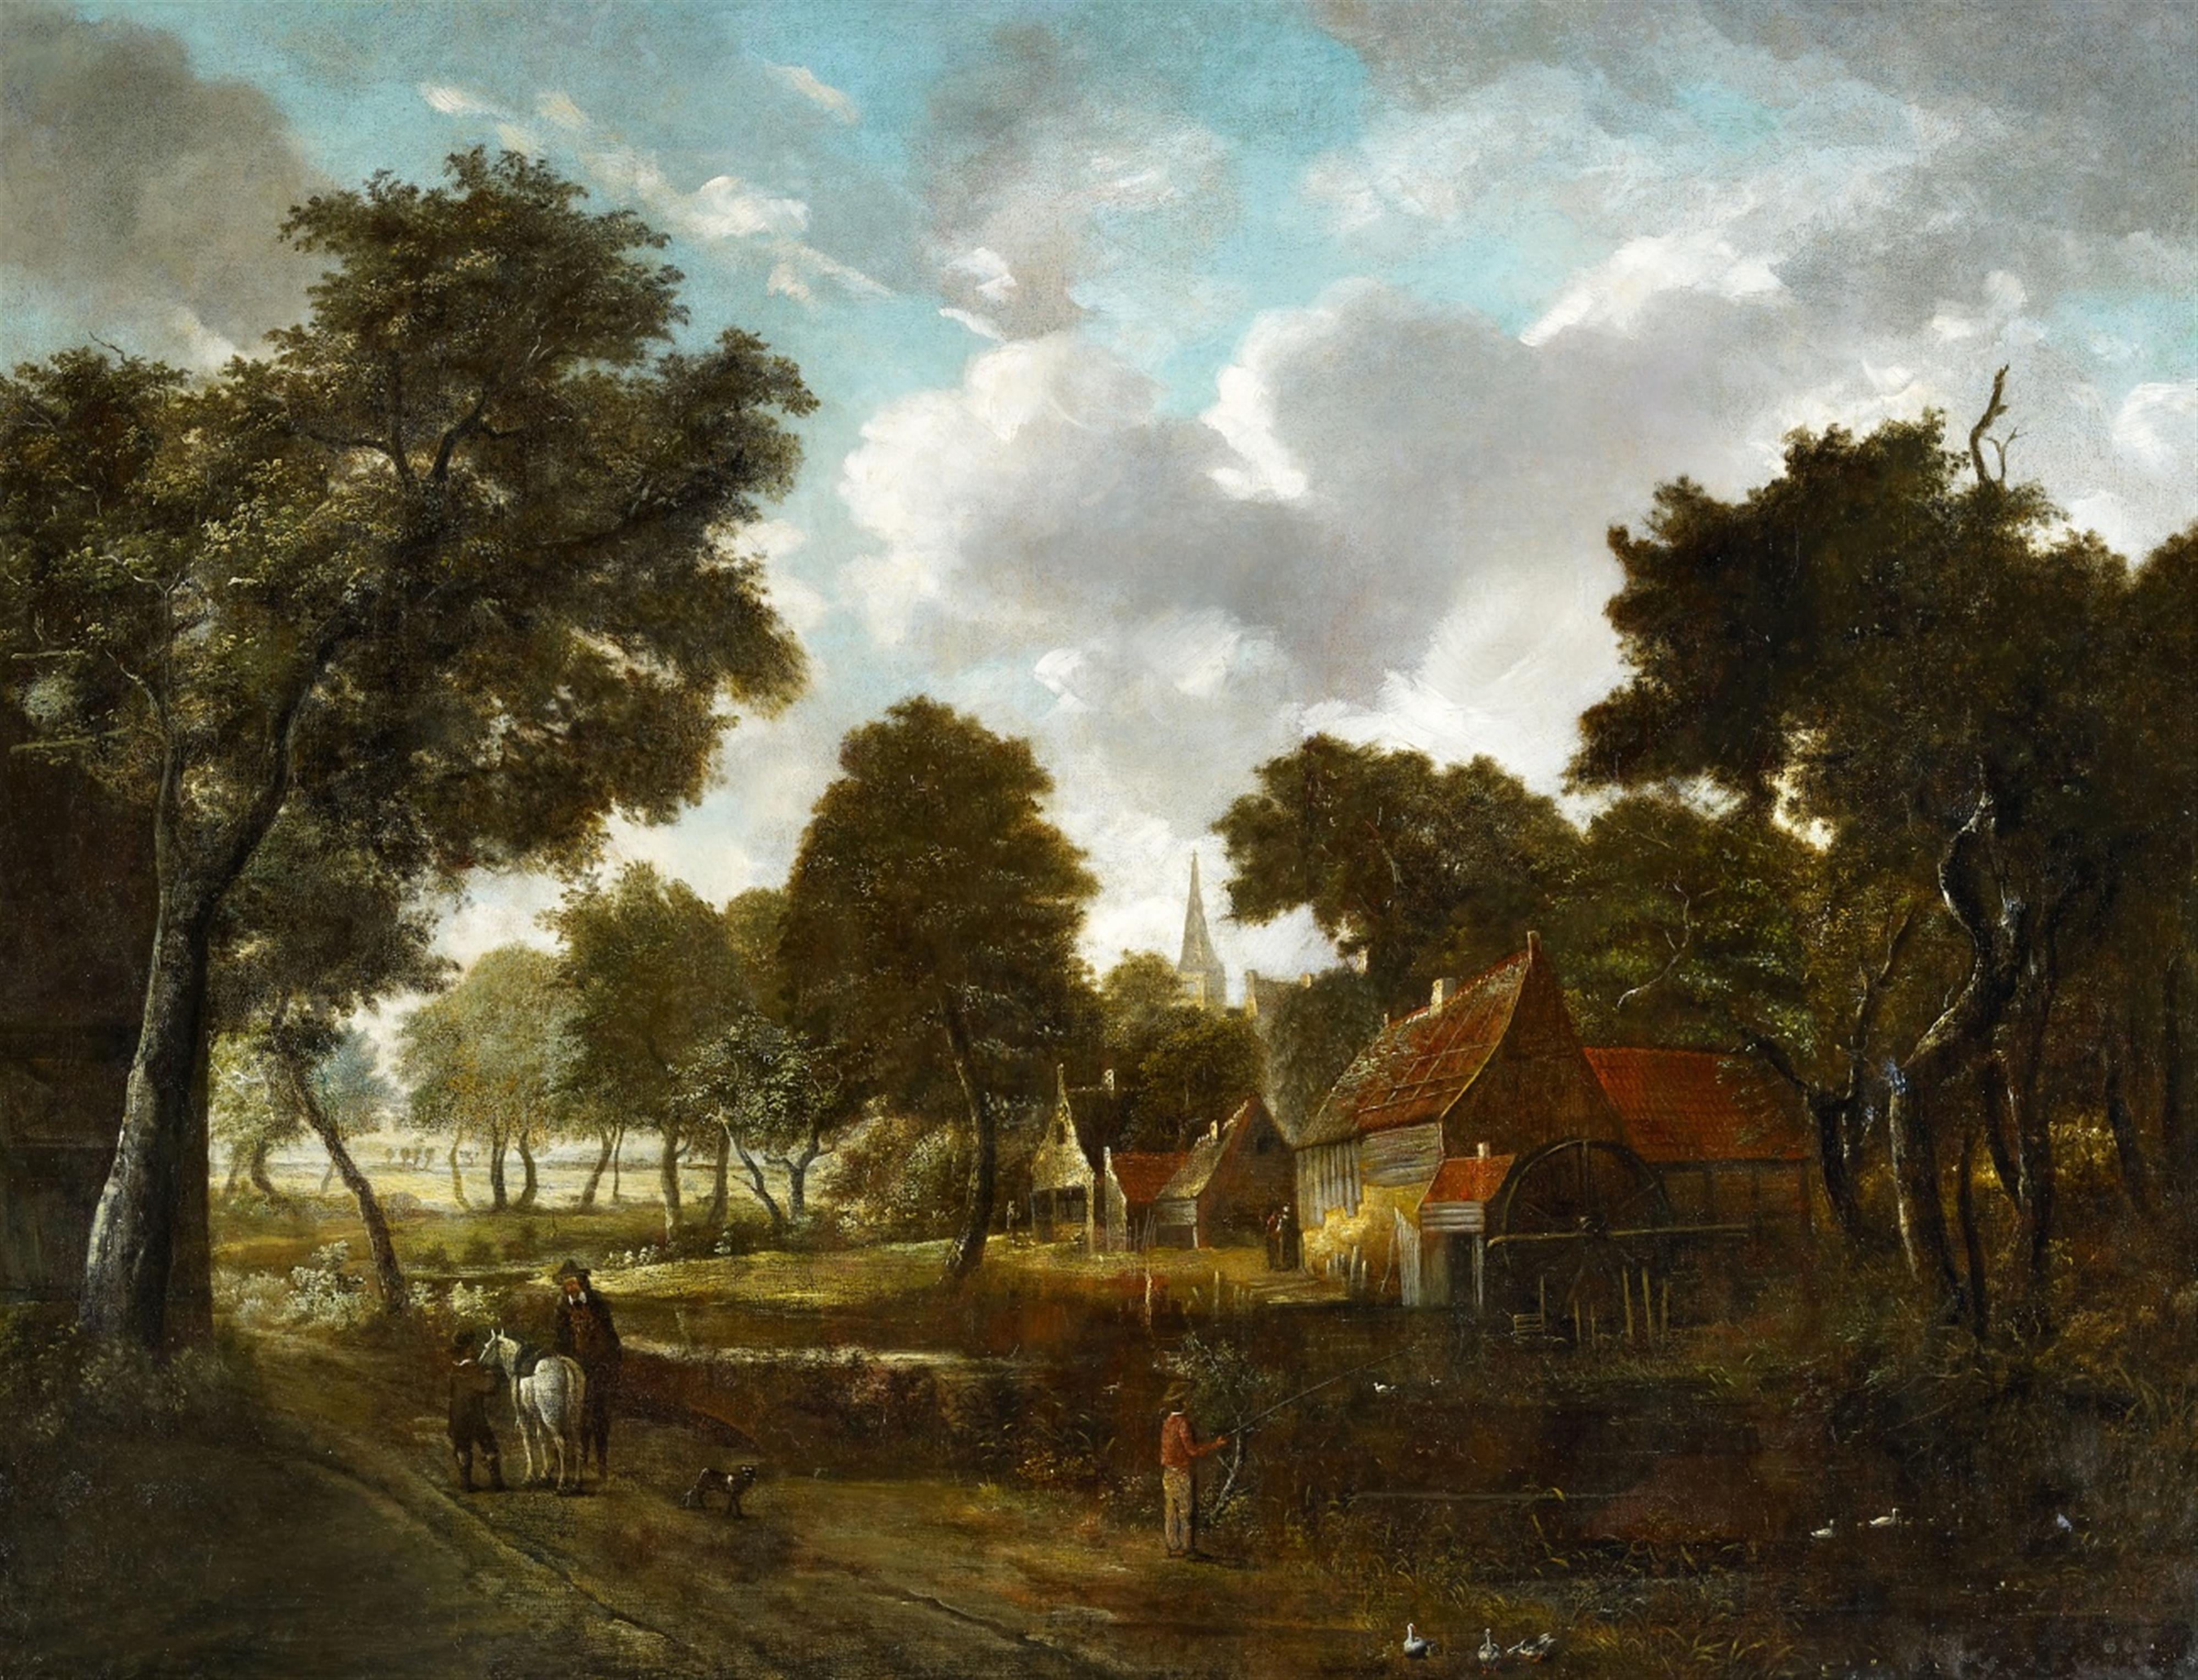 Meindert Hobbema - Watermill and Village in a Wooded Landscape - image-1